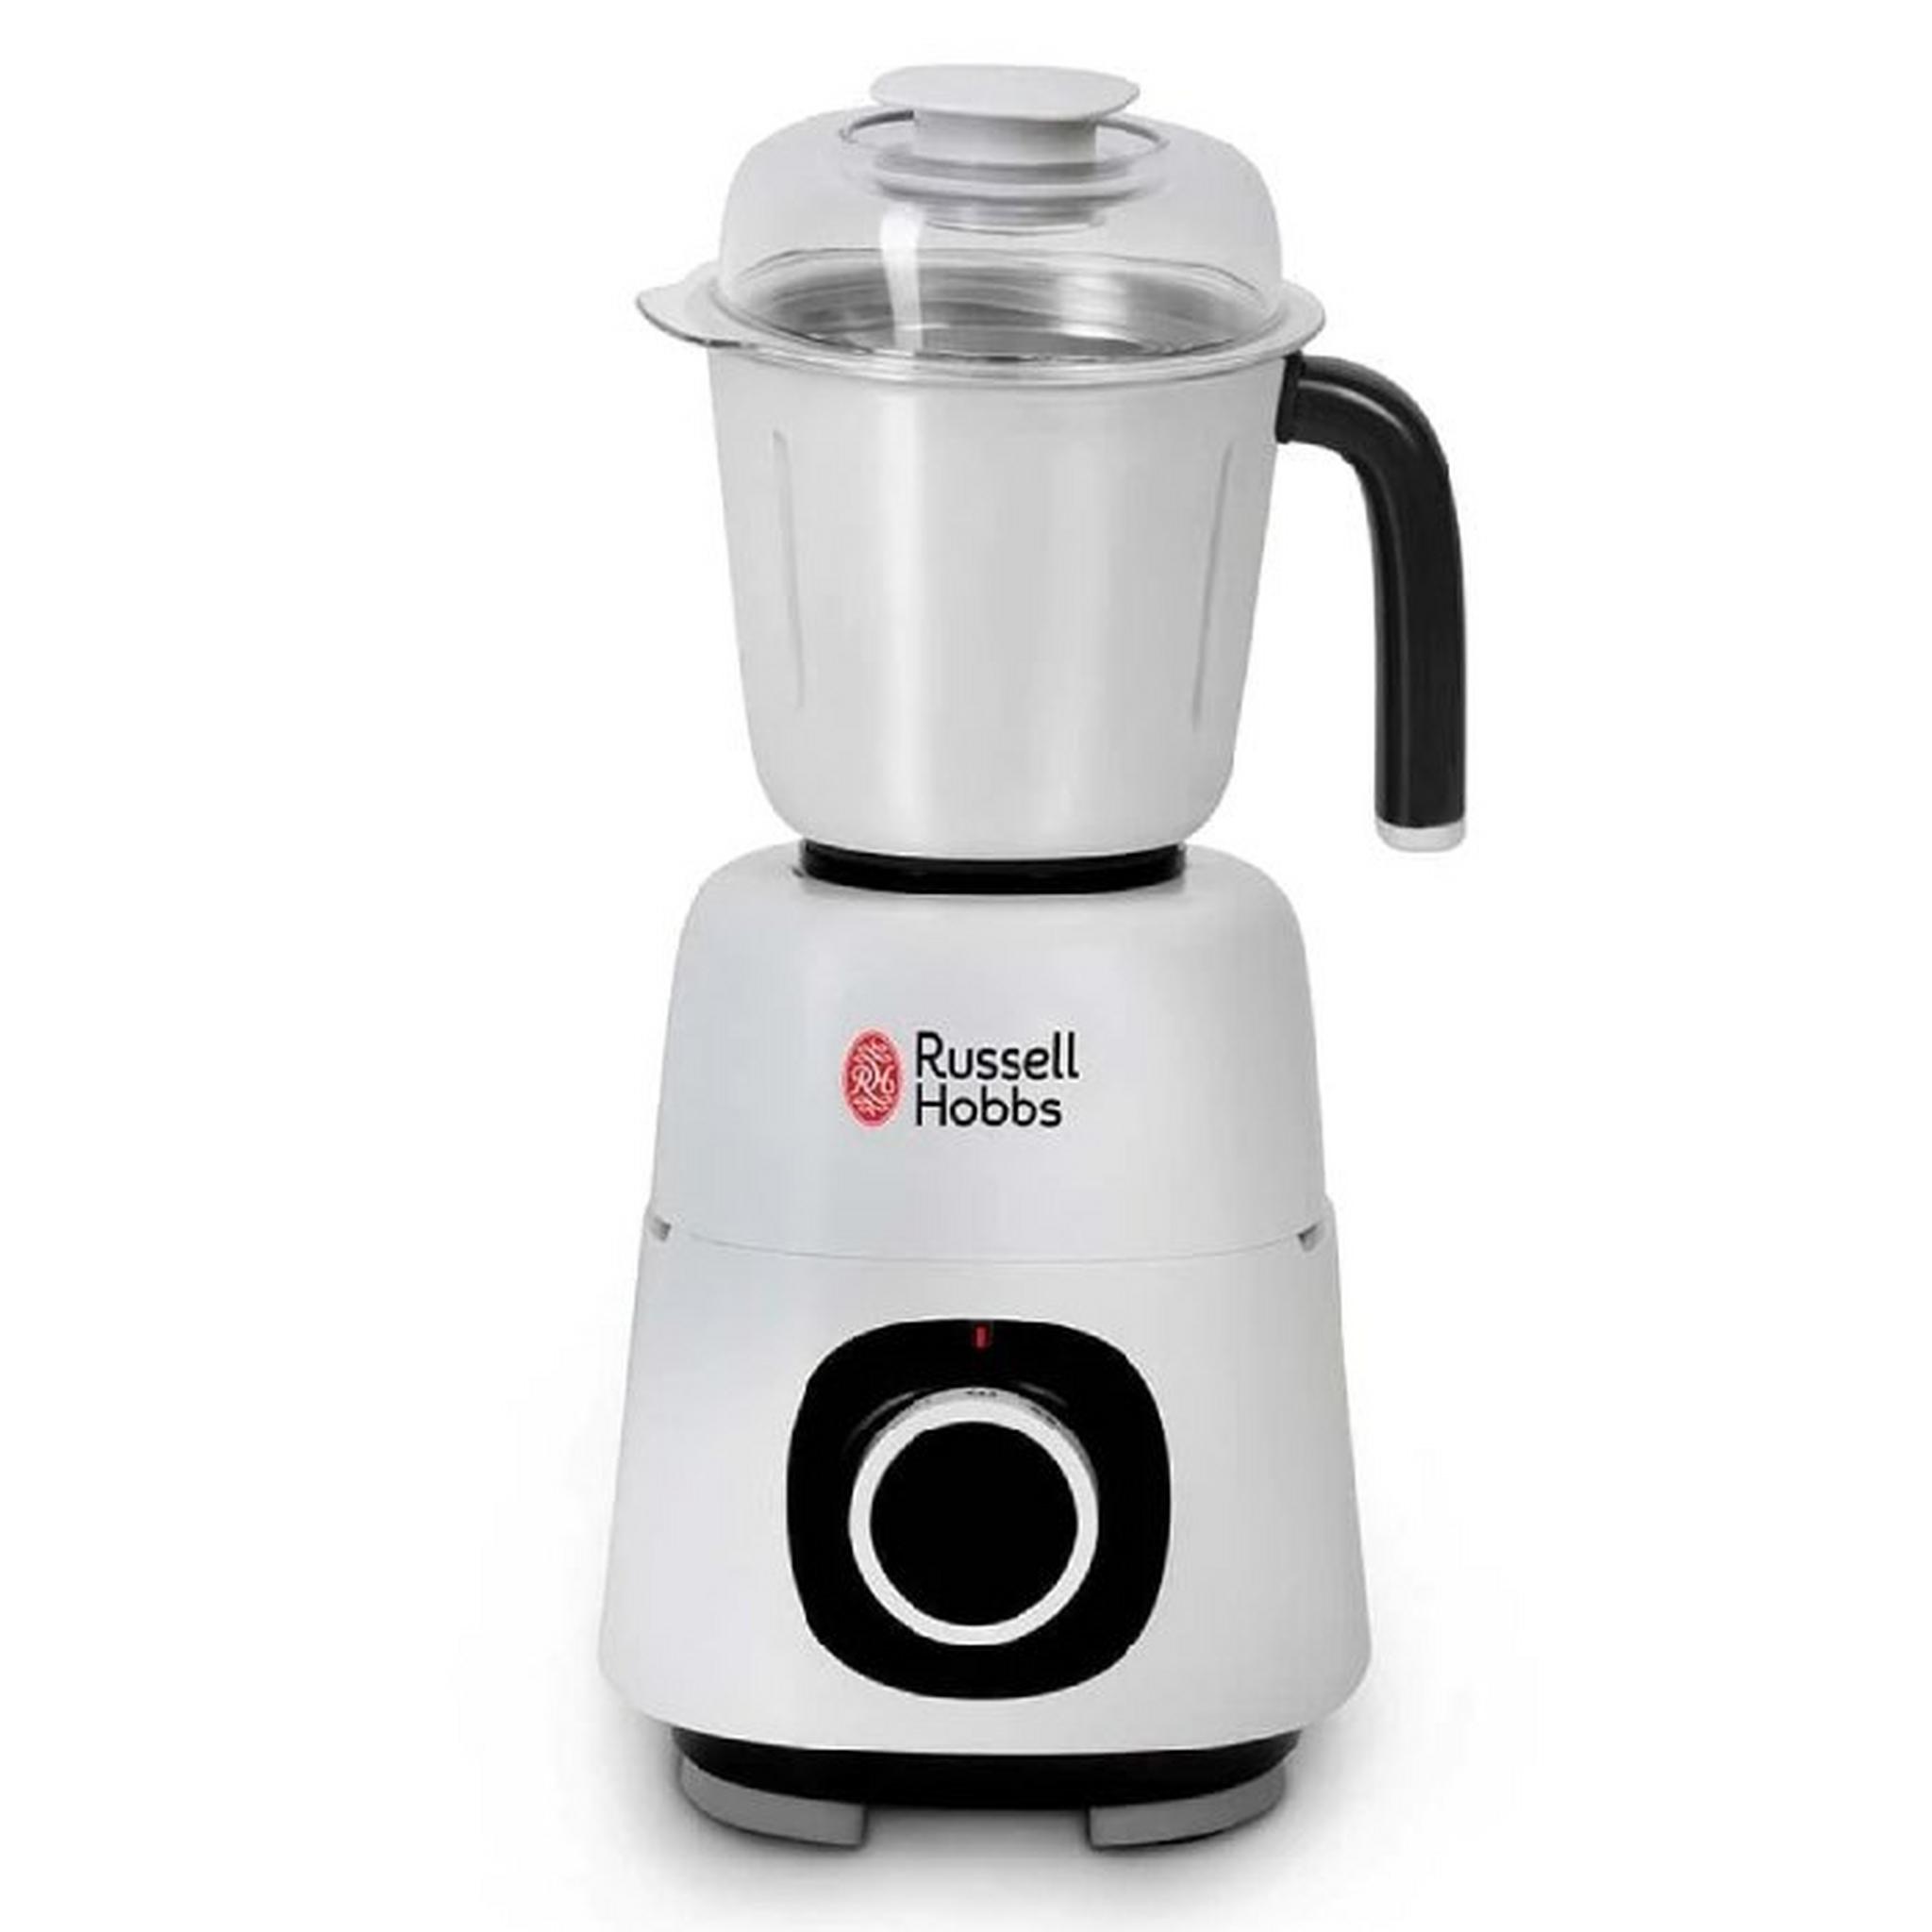 Russell Hobbs Mixer Grinder, 750W, 42505 - White